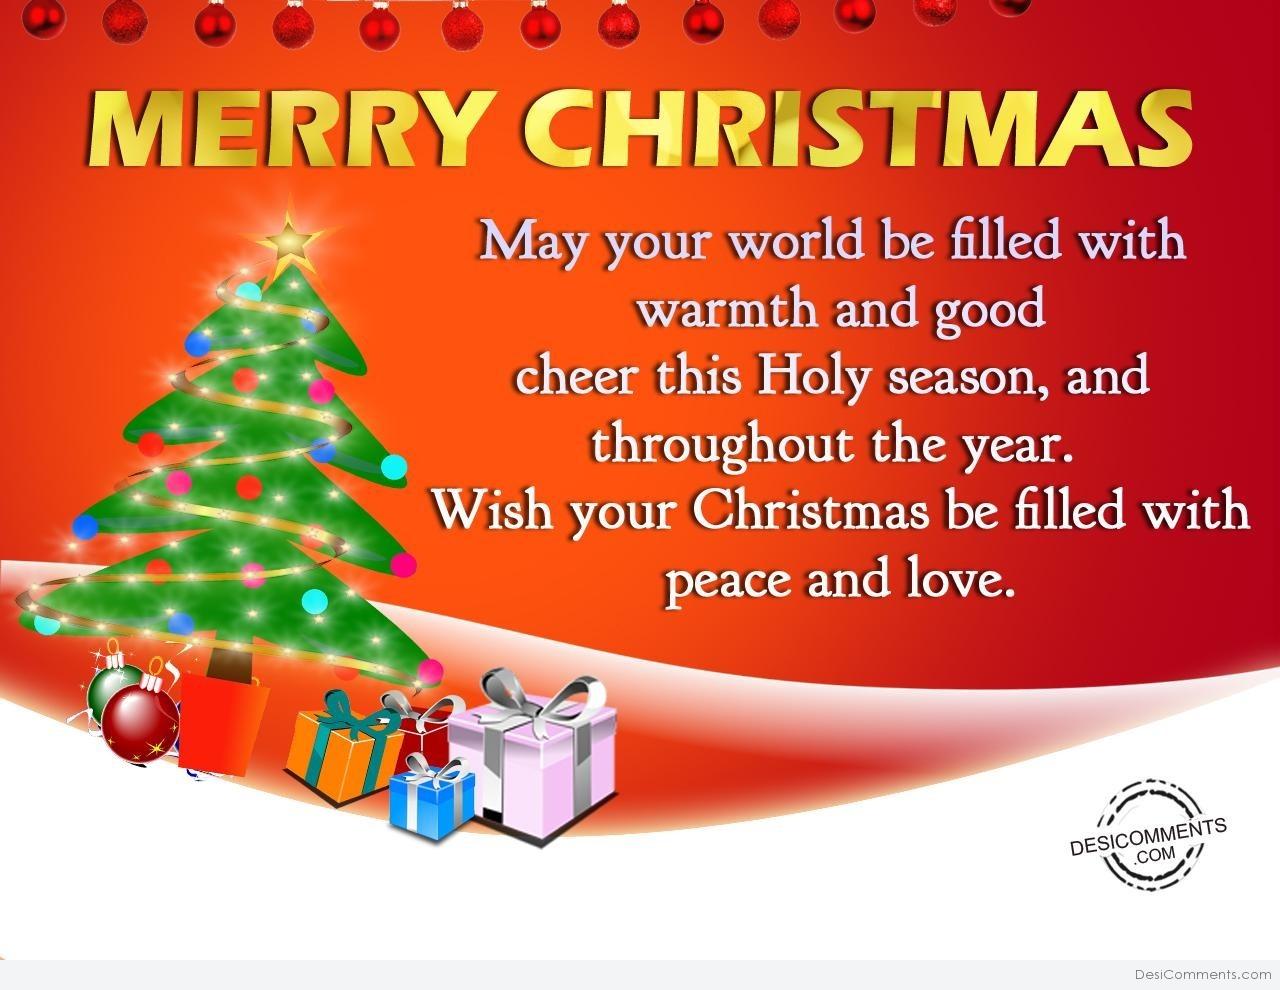 760+ Christmas Images, Pictures, Photos - Page 12 | Desi Comments